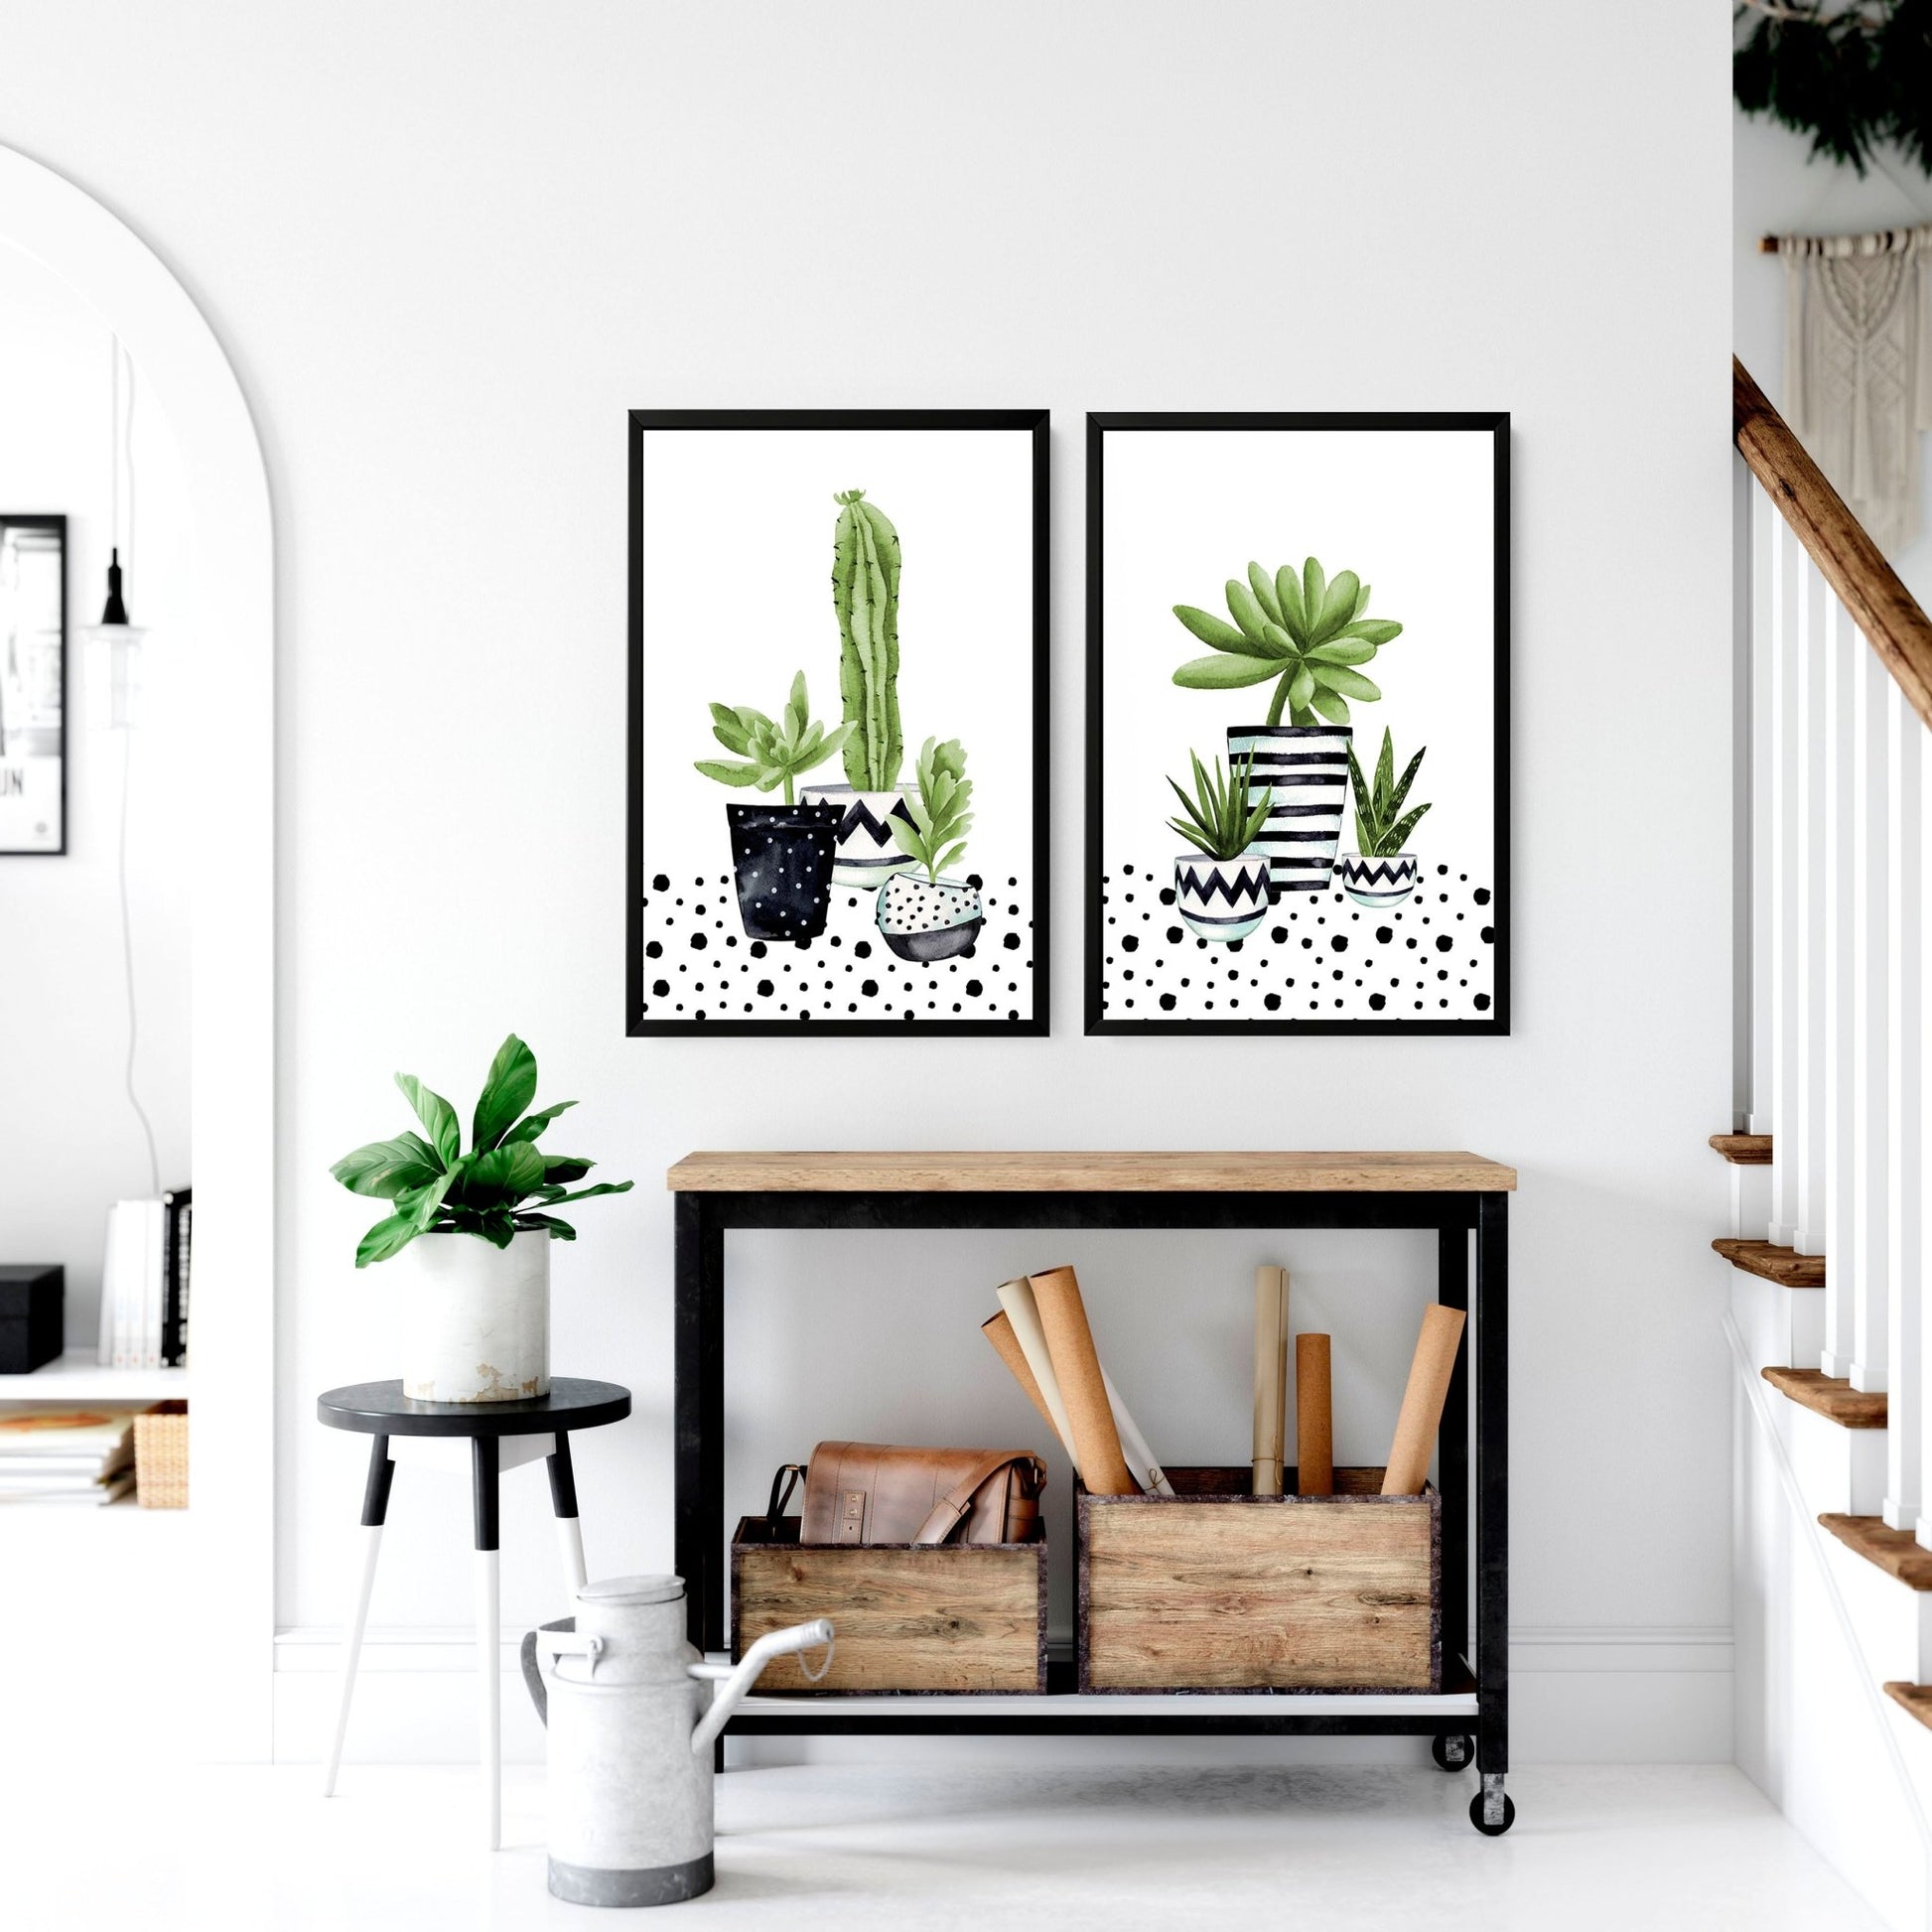 Art for the kitchen wall | set of 2 wall art prints - About Wall Art